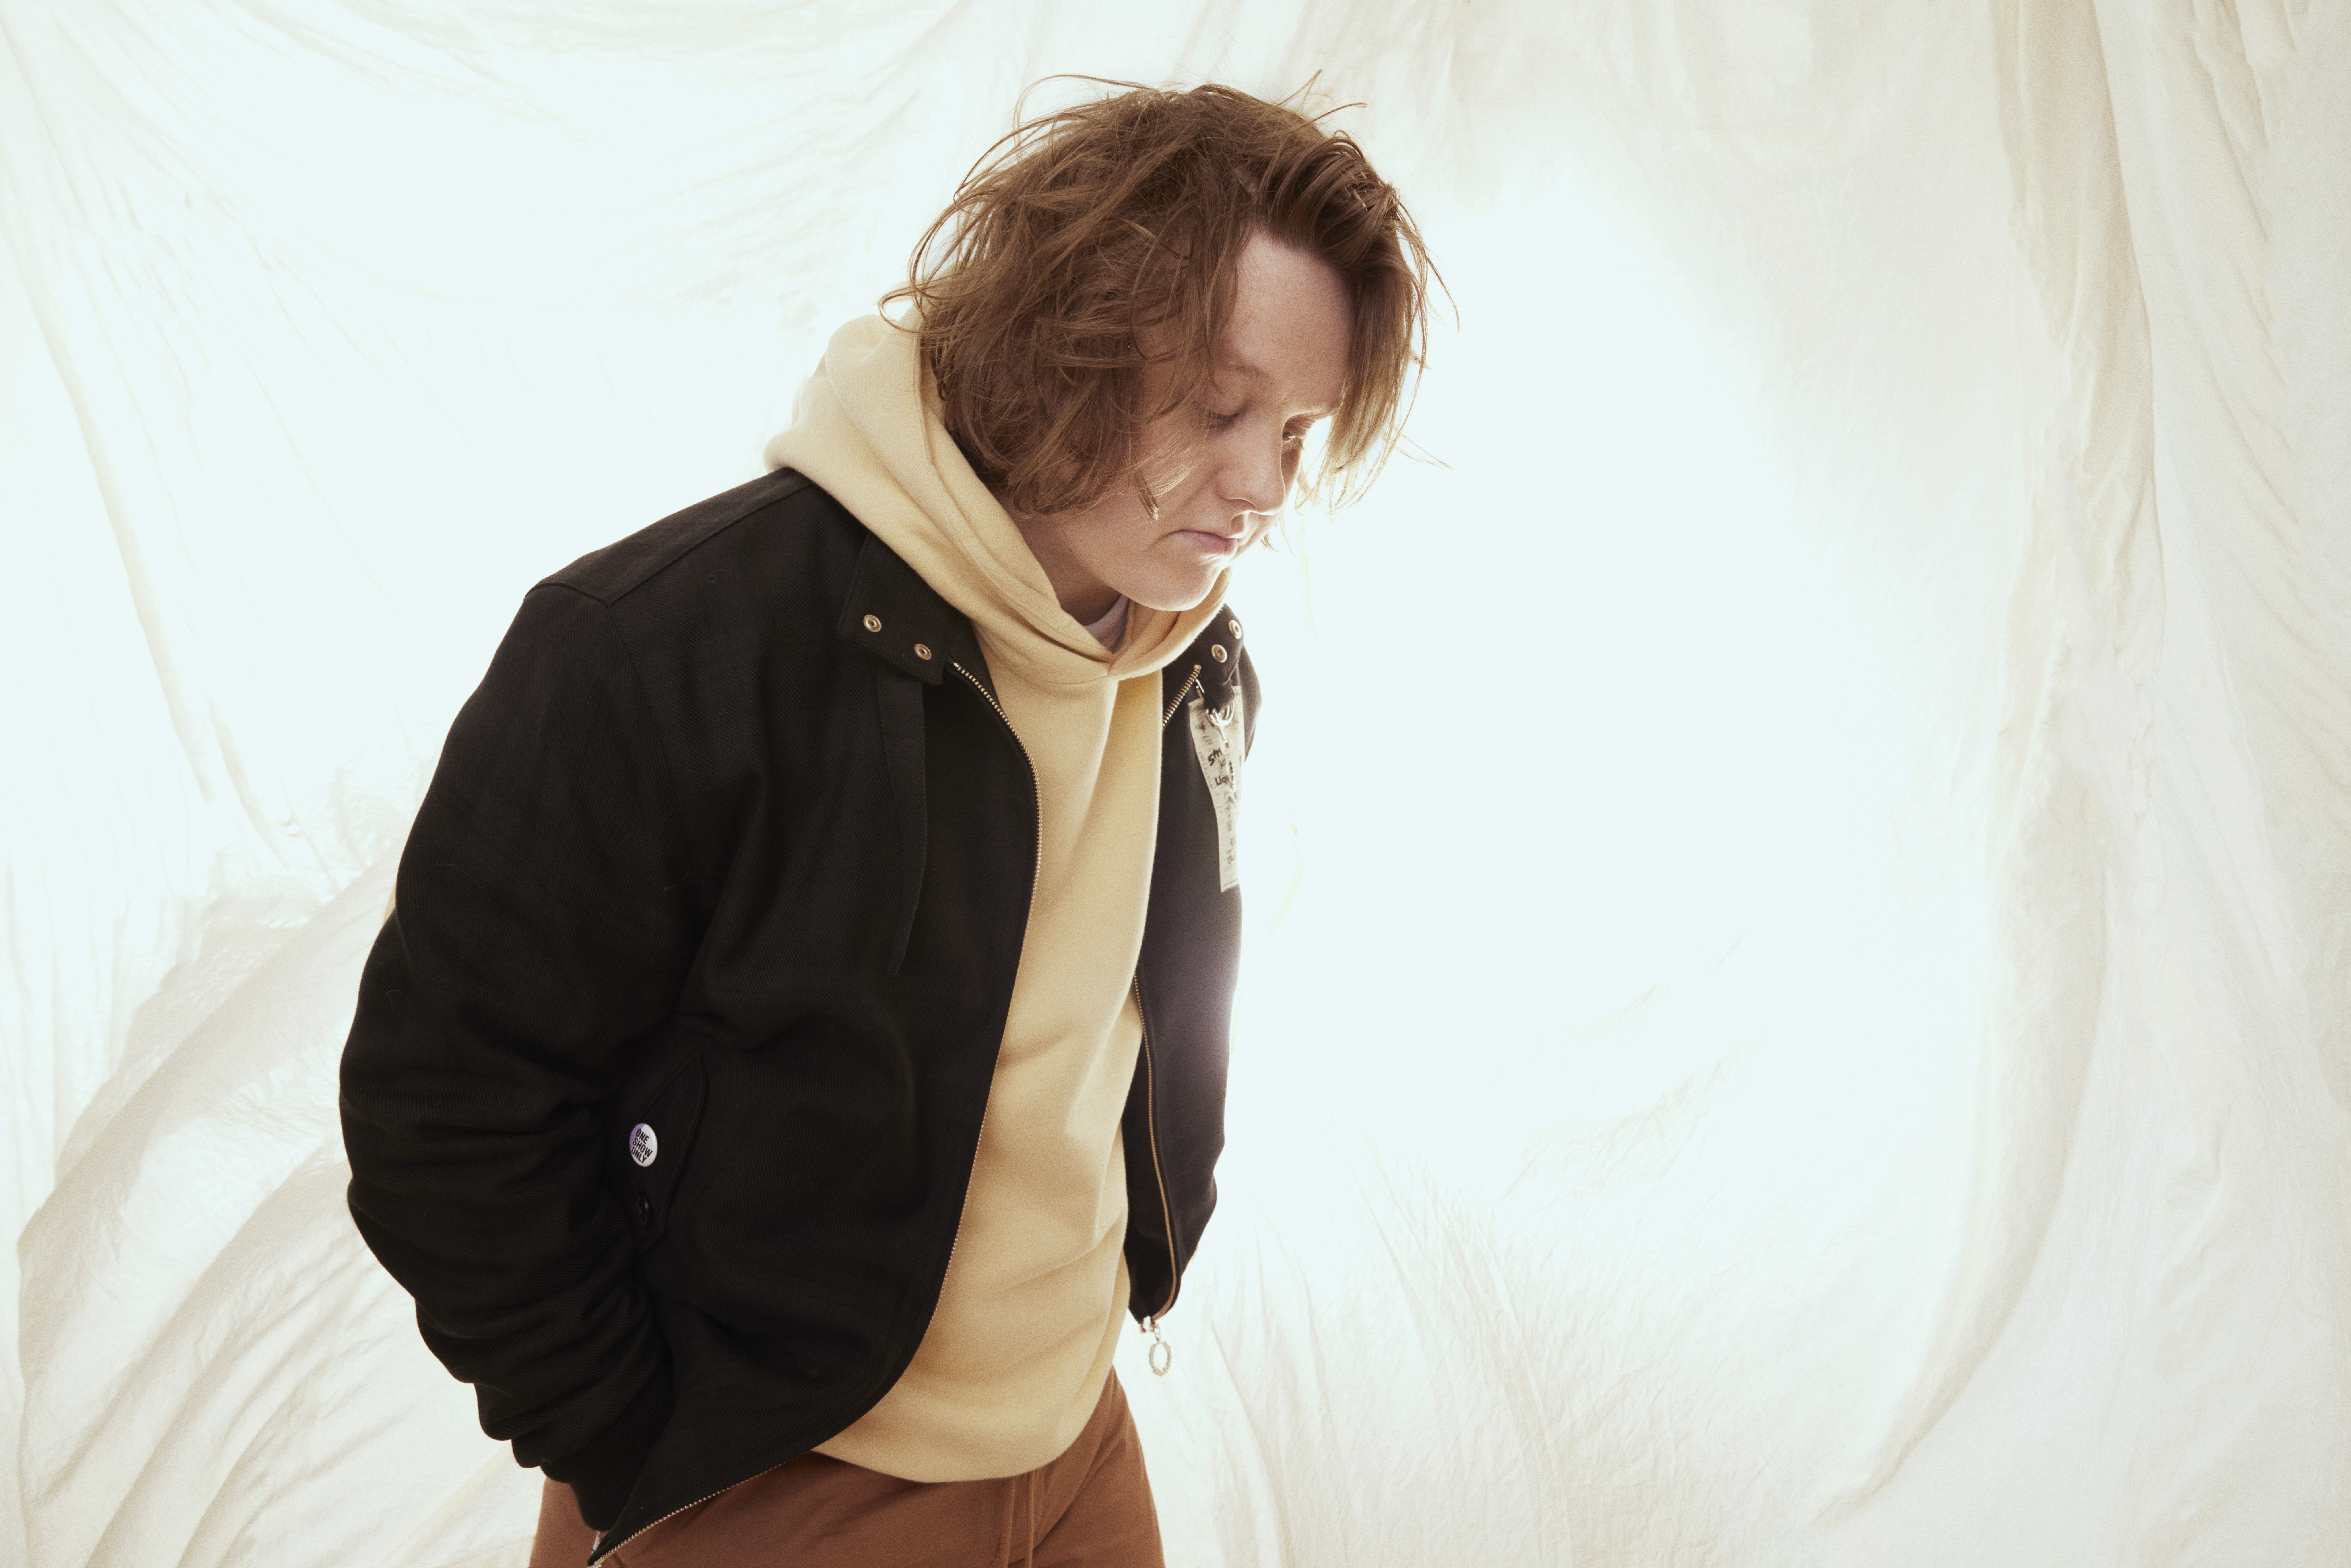 Lewis Capaldi refuses to make an album about 